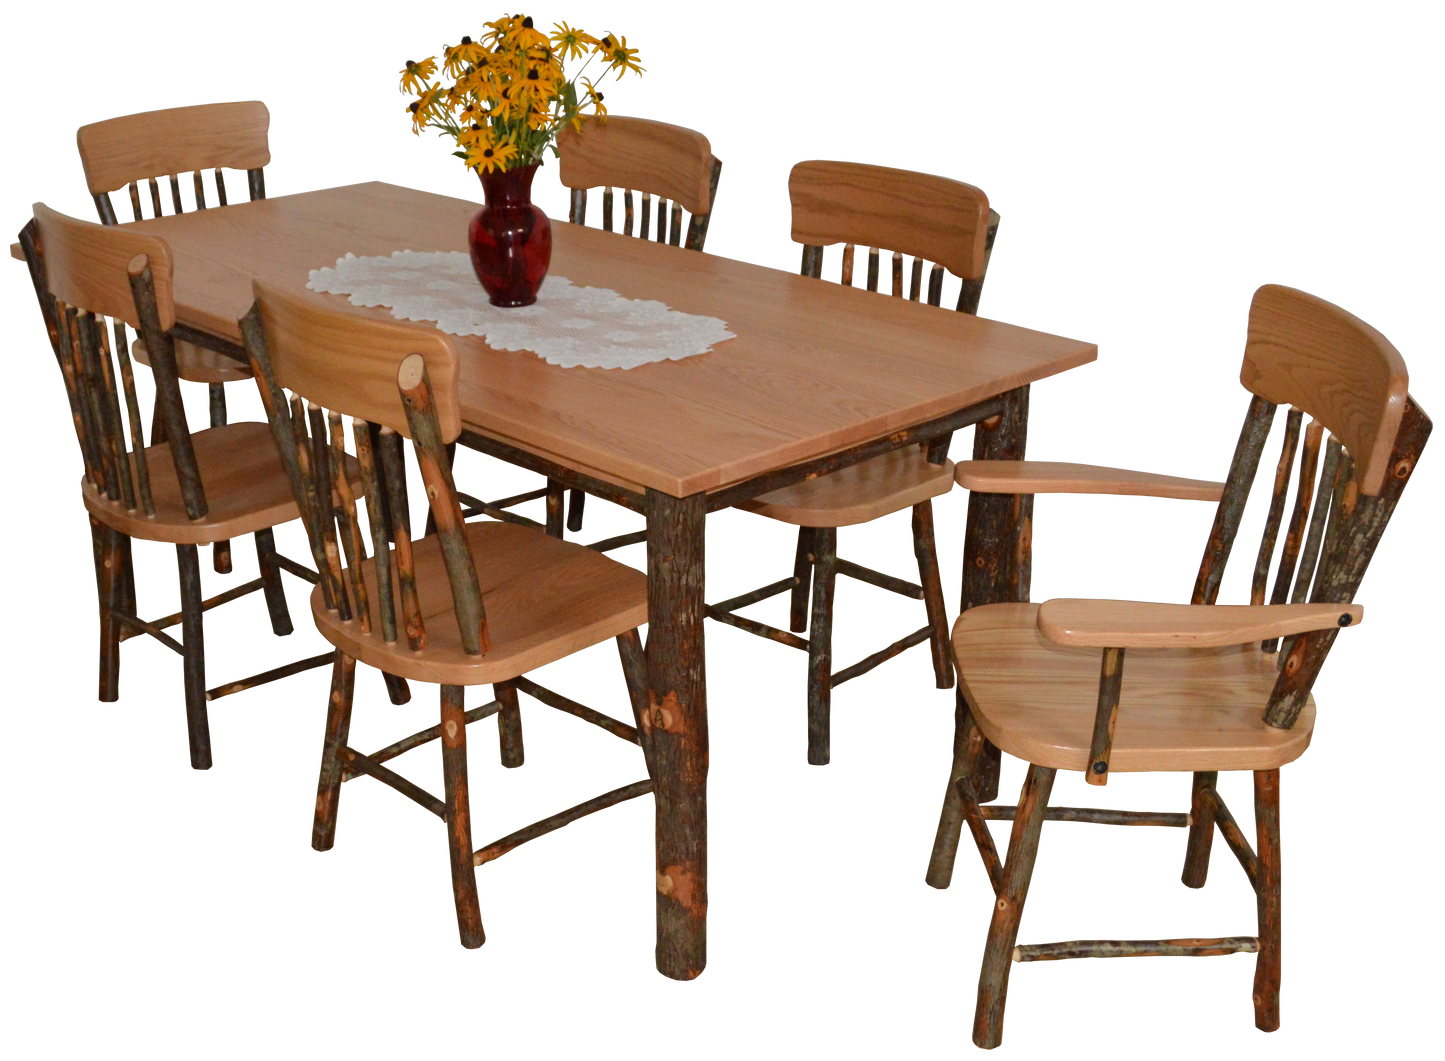 A&L Furniture Co. Hickory 7 Piece Farm Table Dining Set w/ 2 arm Chairs and 4 Dining Chairs - LEAD TIME TO SHIP 4 WEEKS OR LESS